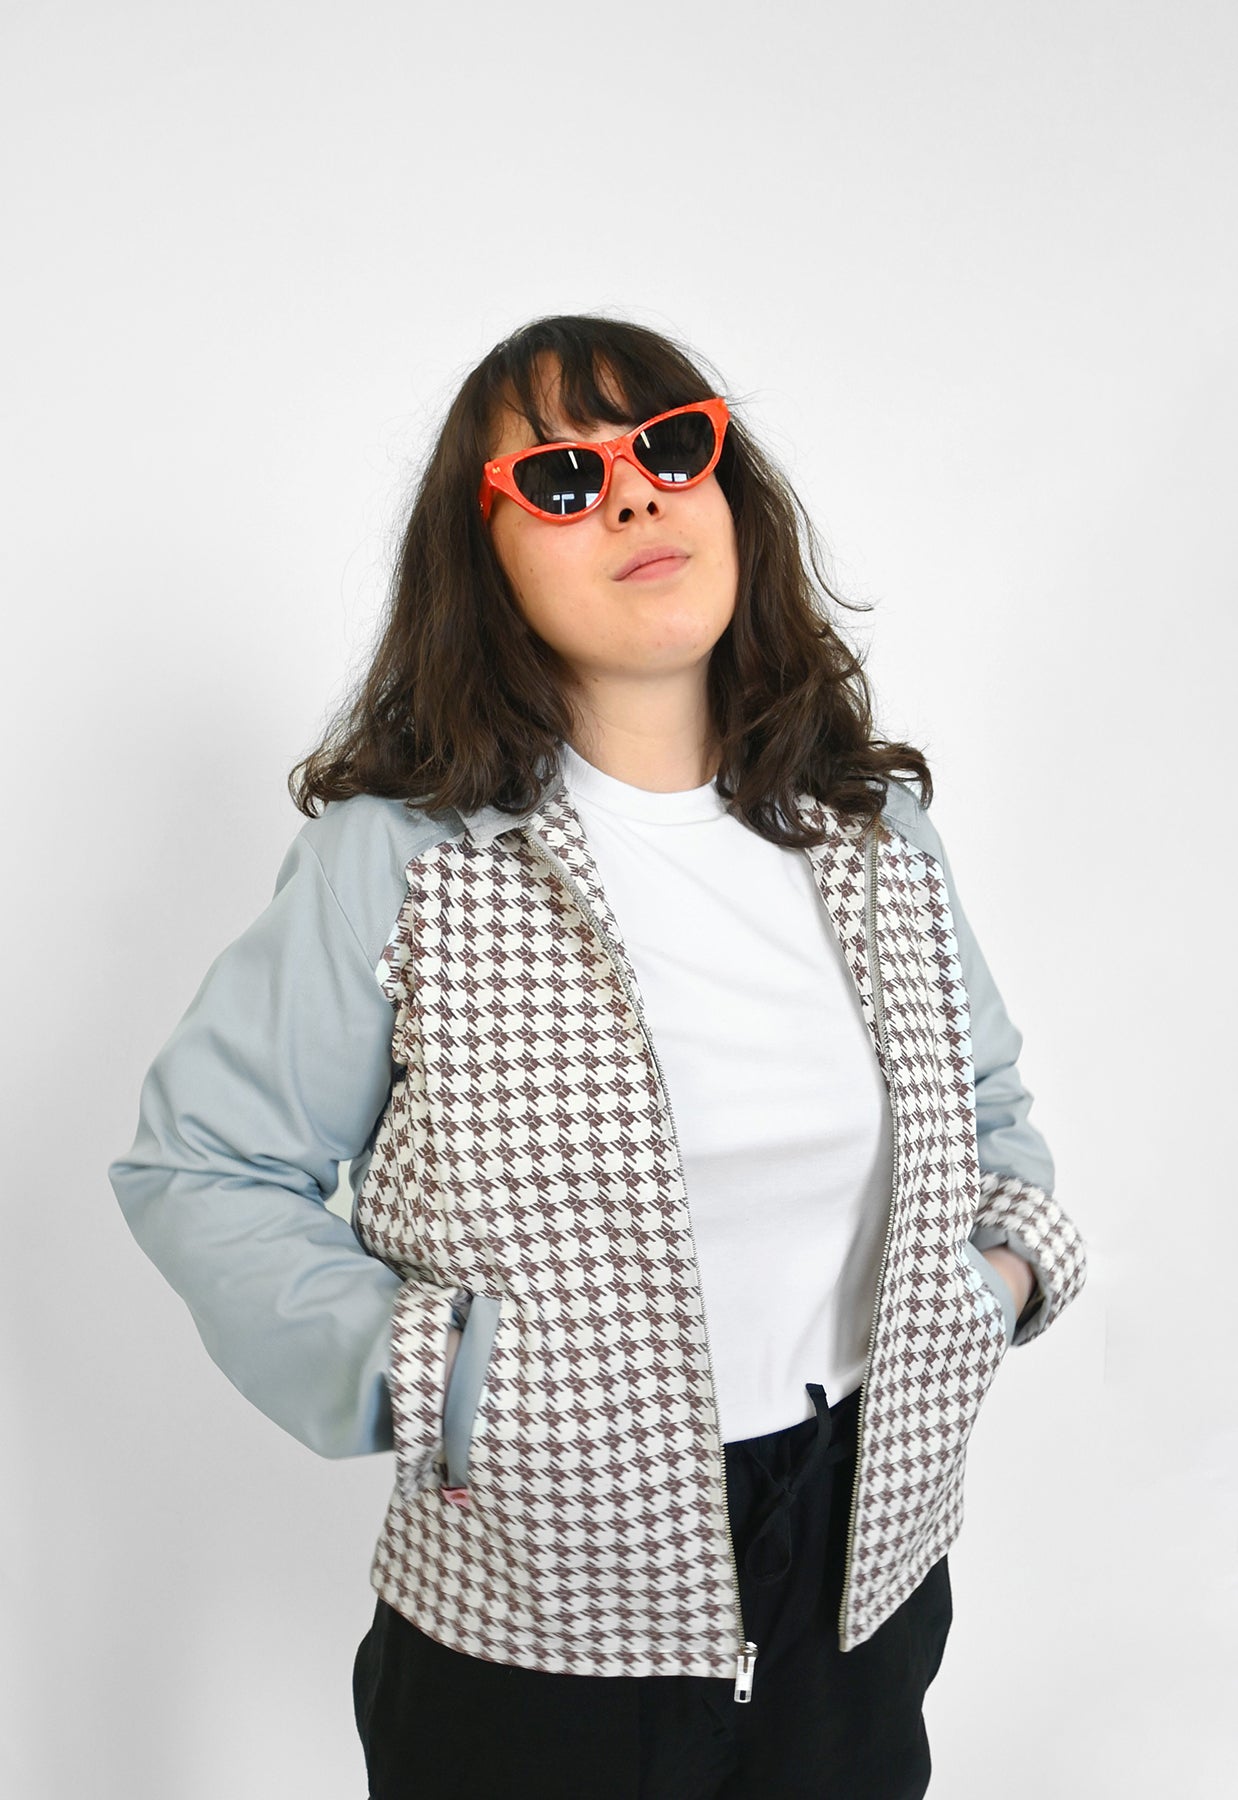 "Beetletooth" print Jacket design by Natali Koromoto's co-founded clothing brand Ho Hos Hole in The Wall. Made in NYC with Eco-Twill, a combo organic cotton and polyester spun from recycled water and soda bottles.